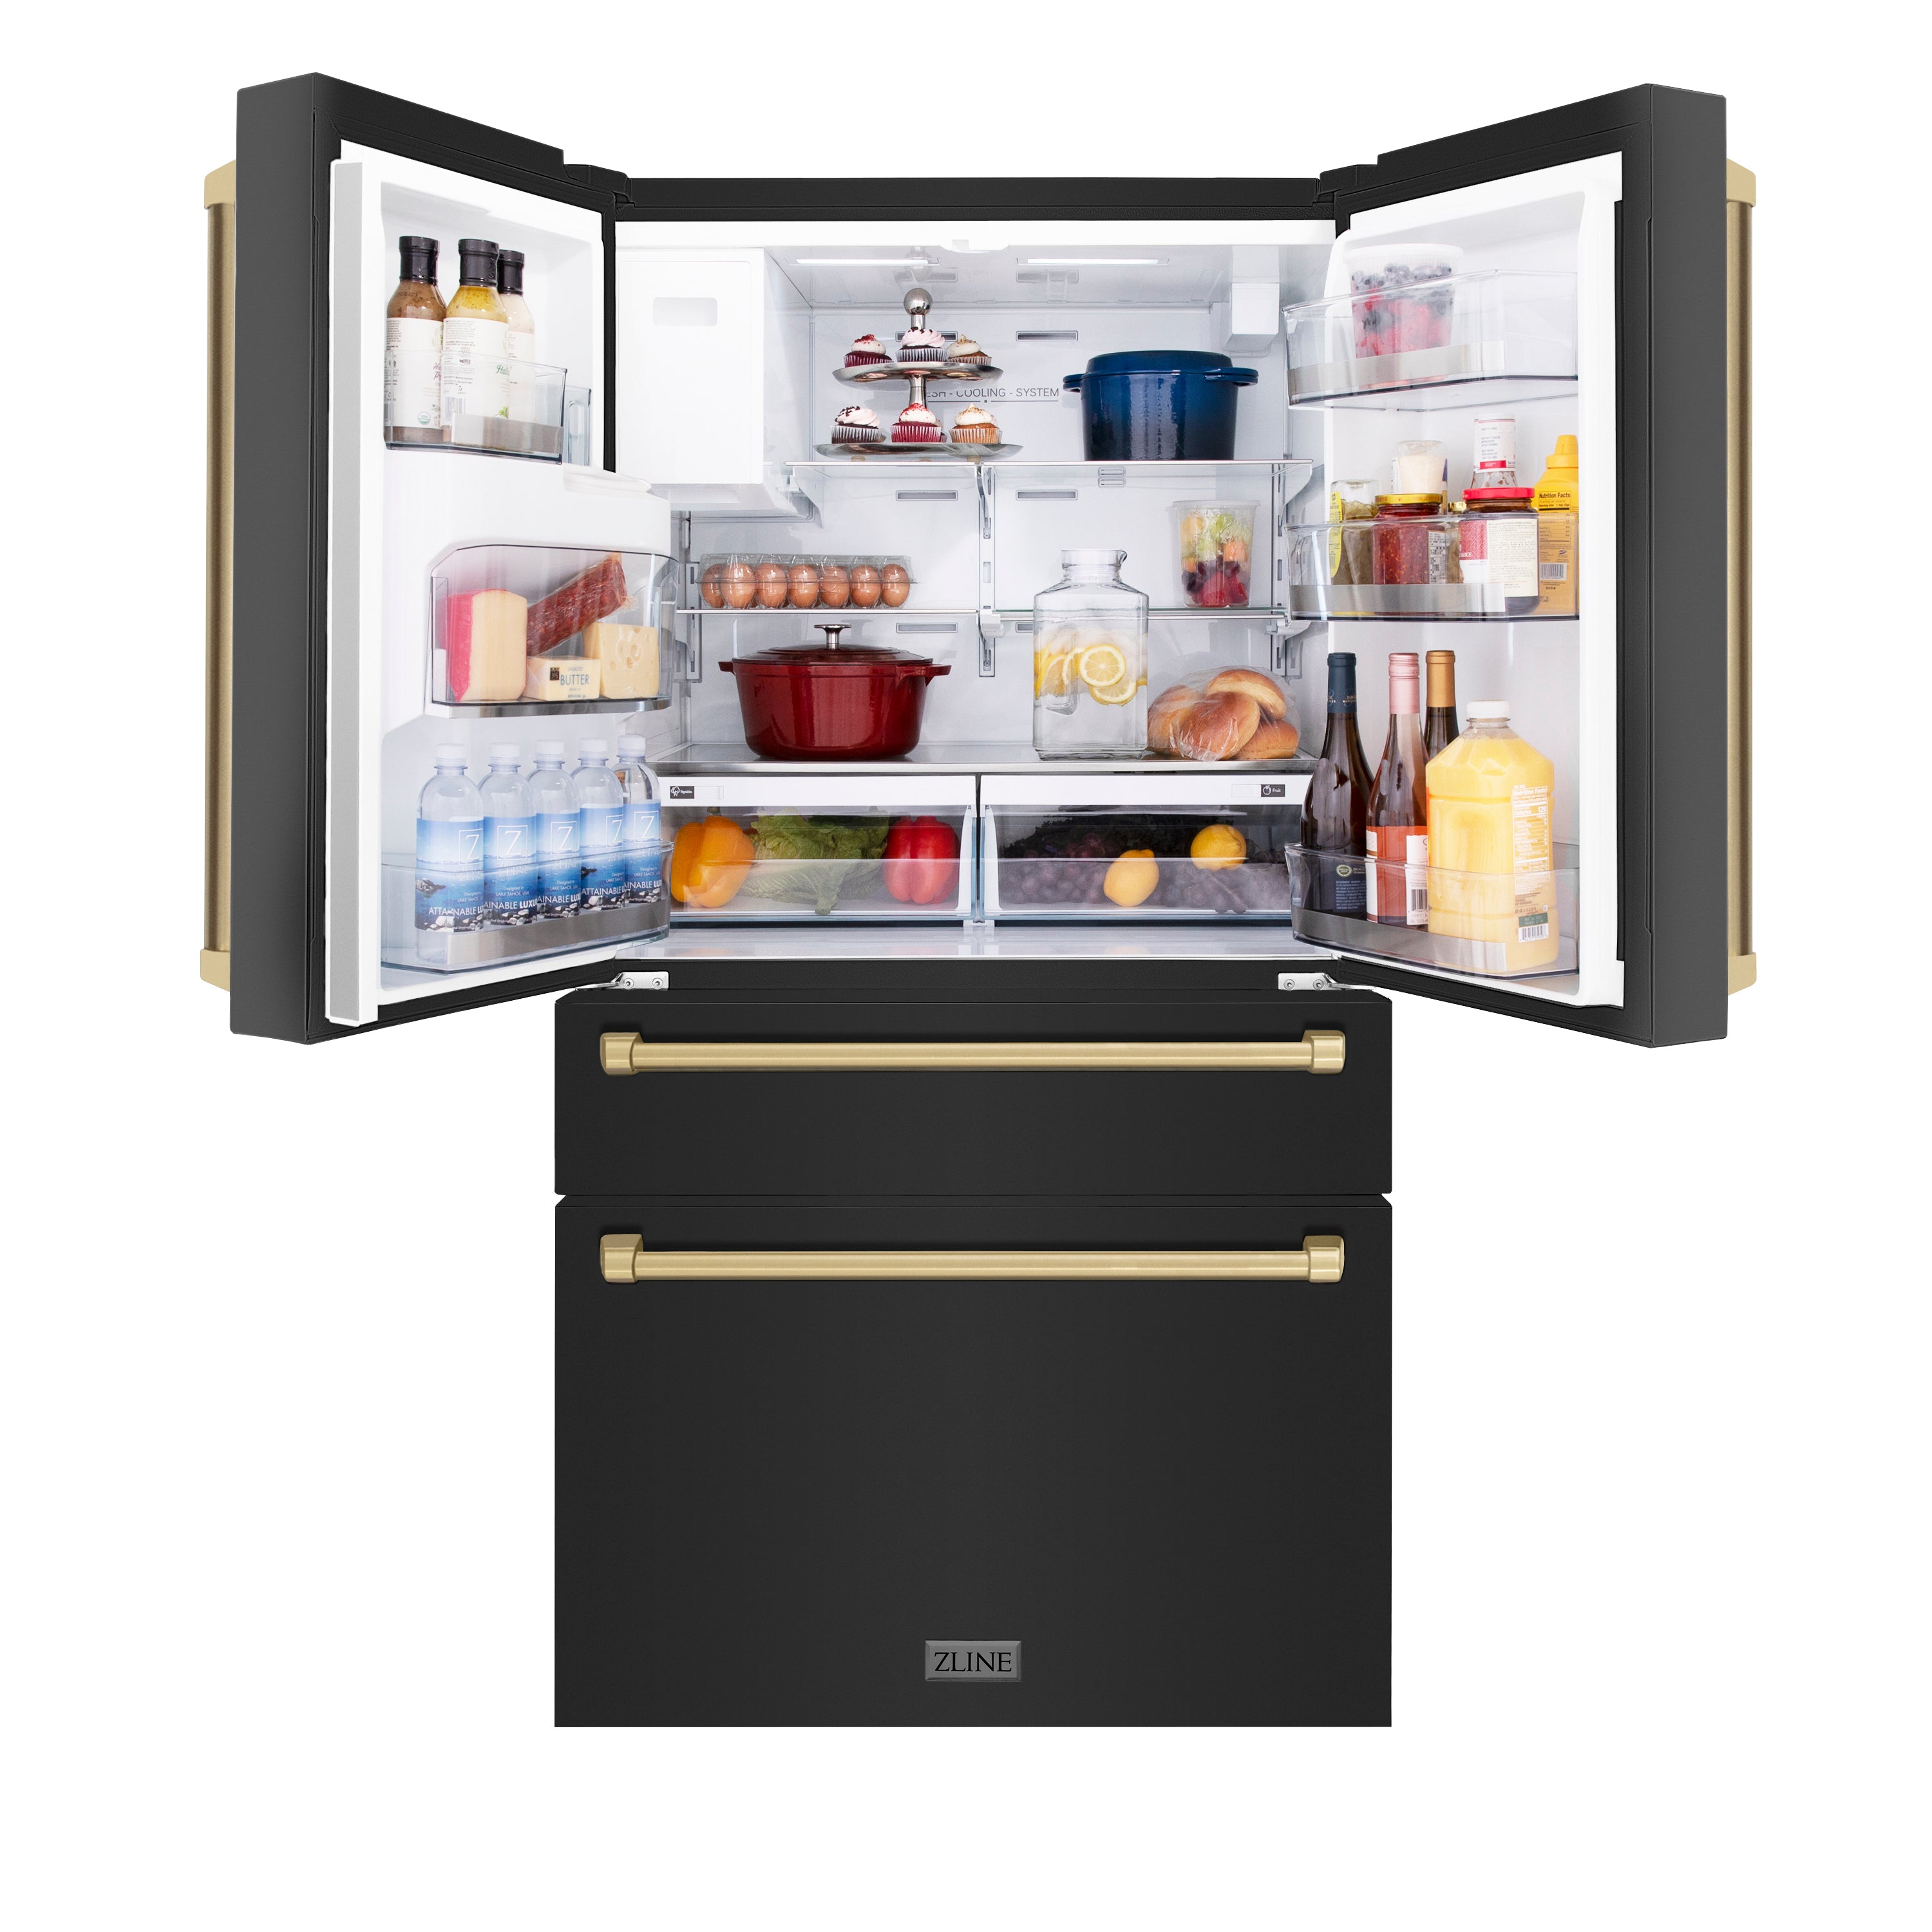 ZLINE 36" Autograph Edition 21.6 cu. ft 4-Door French Door Refrigerator with Water and Ice Dispenser in Fingerprint Resistant Black Stainless Steel with Champagne Bronze Handles (RFMZ-W-36-BS-CB)